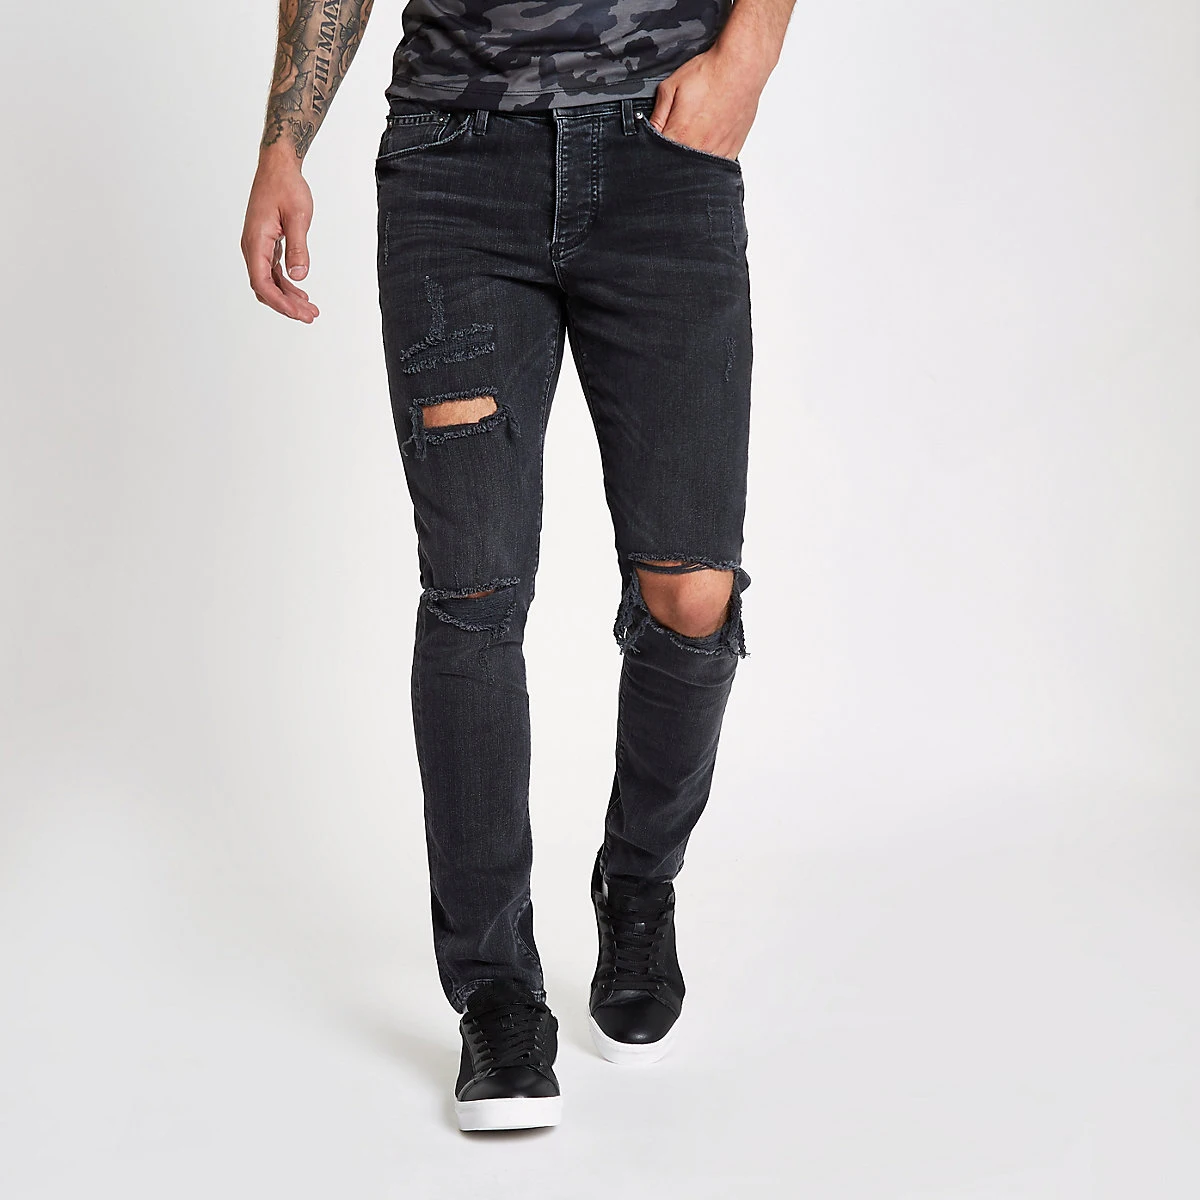 black wash ripped jeans